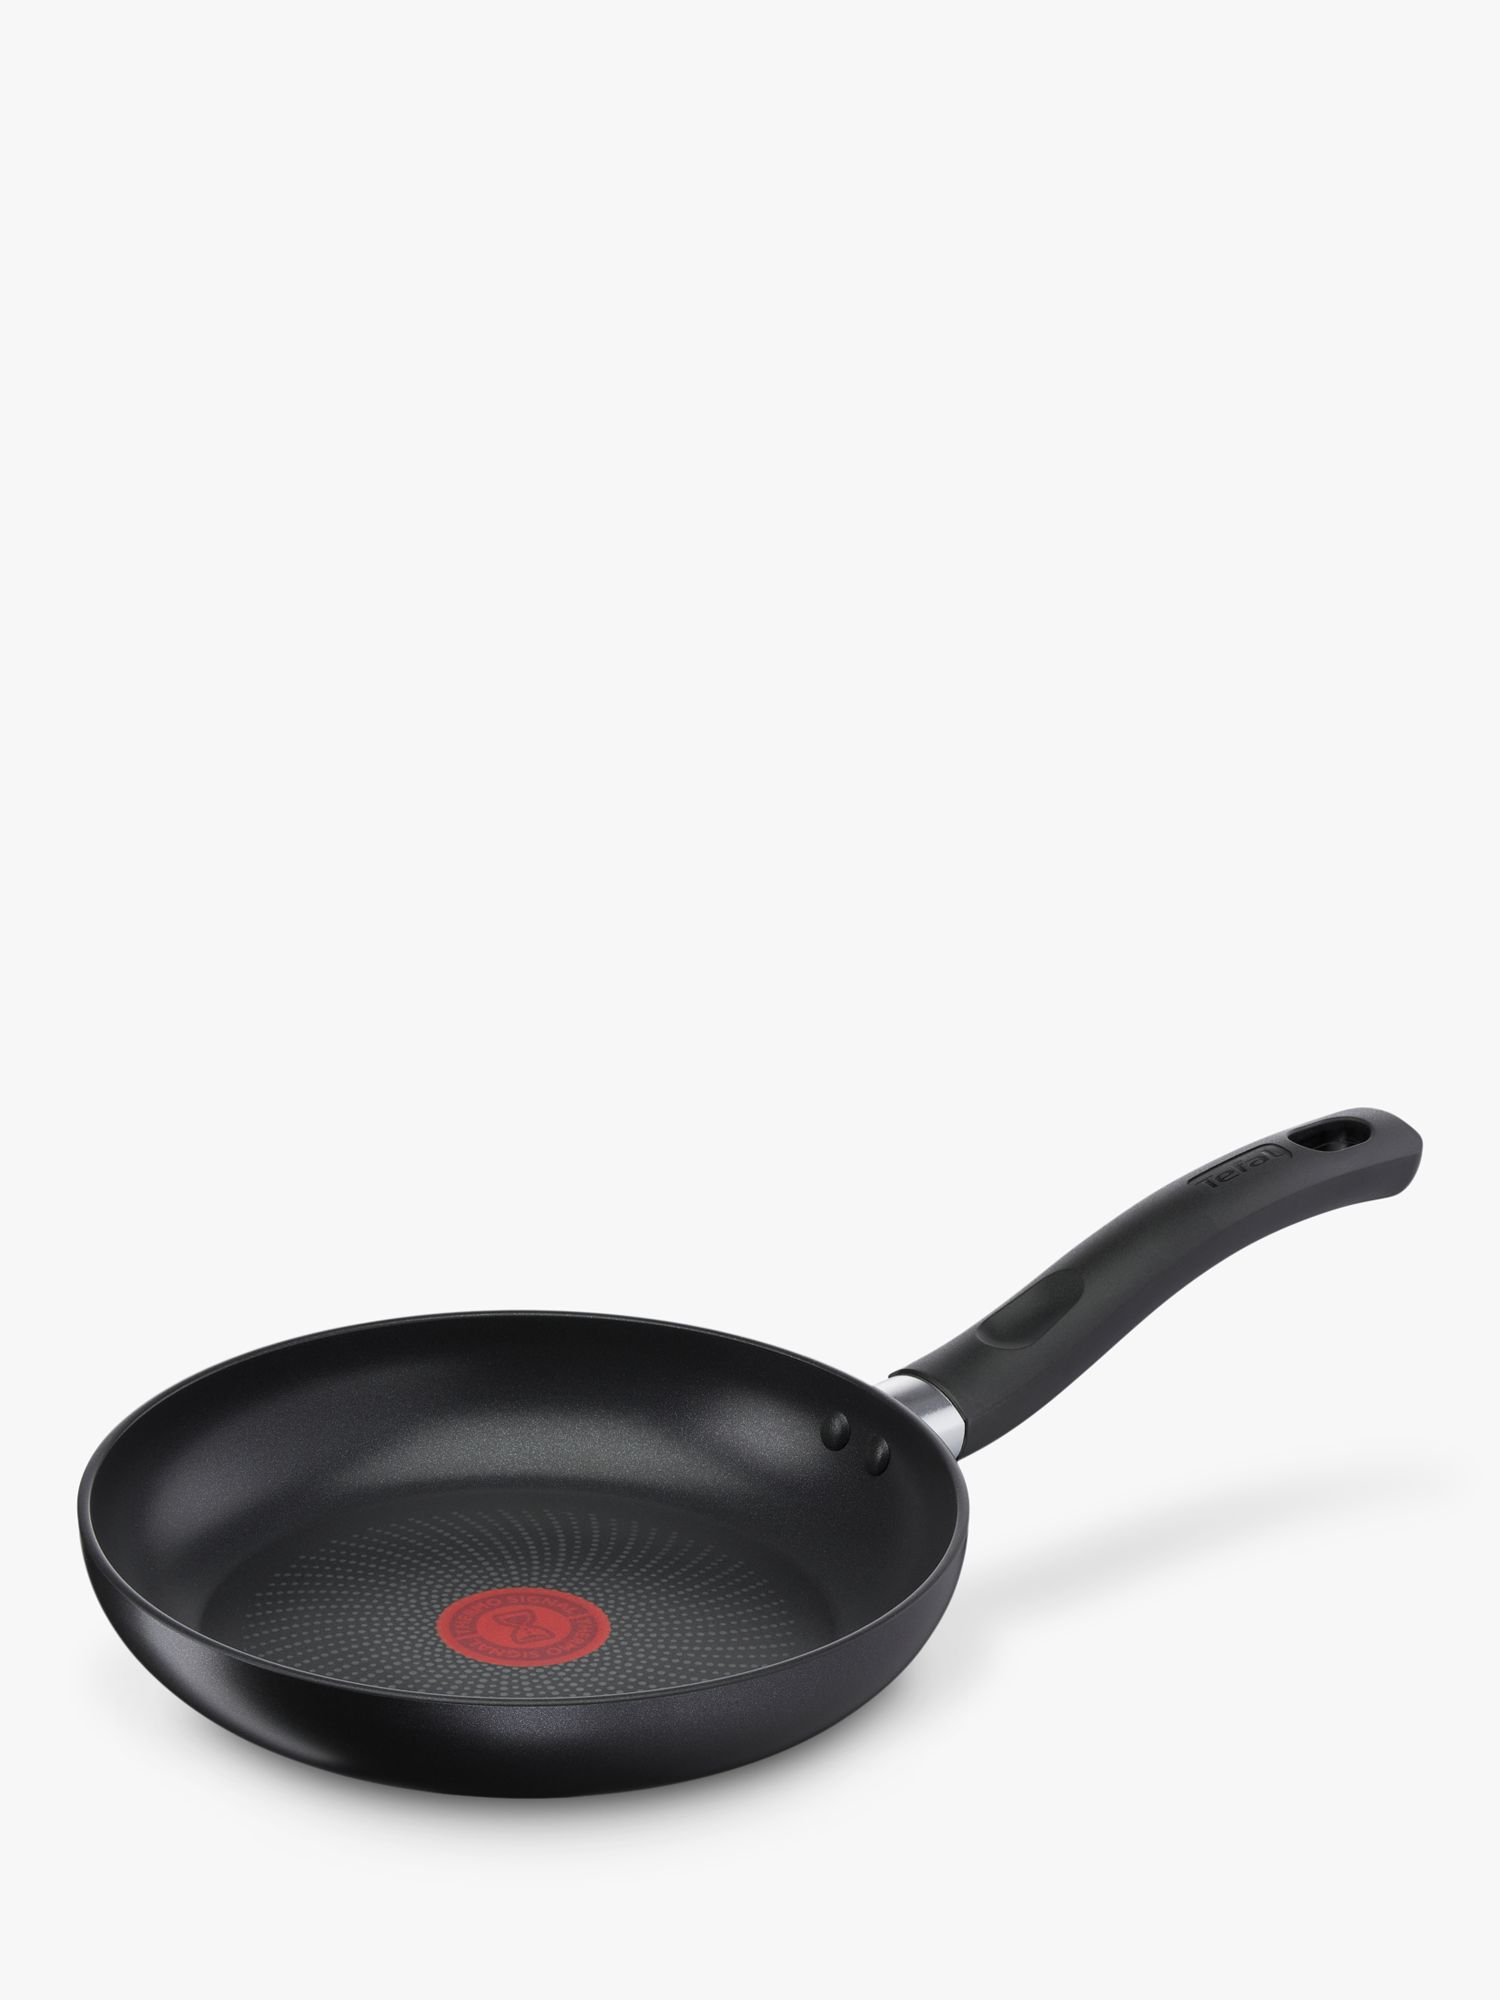 Tefal Ingenio Set of Frying Pans and Saucepans, Aluminium, black, 20 pièces  (Not compatible for induction)